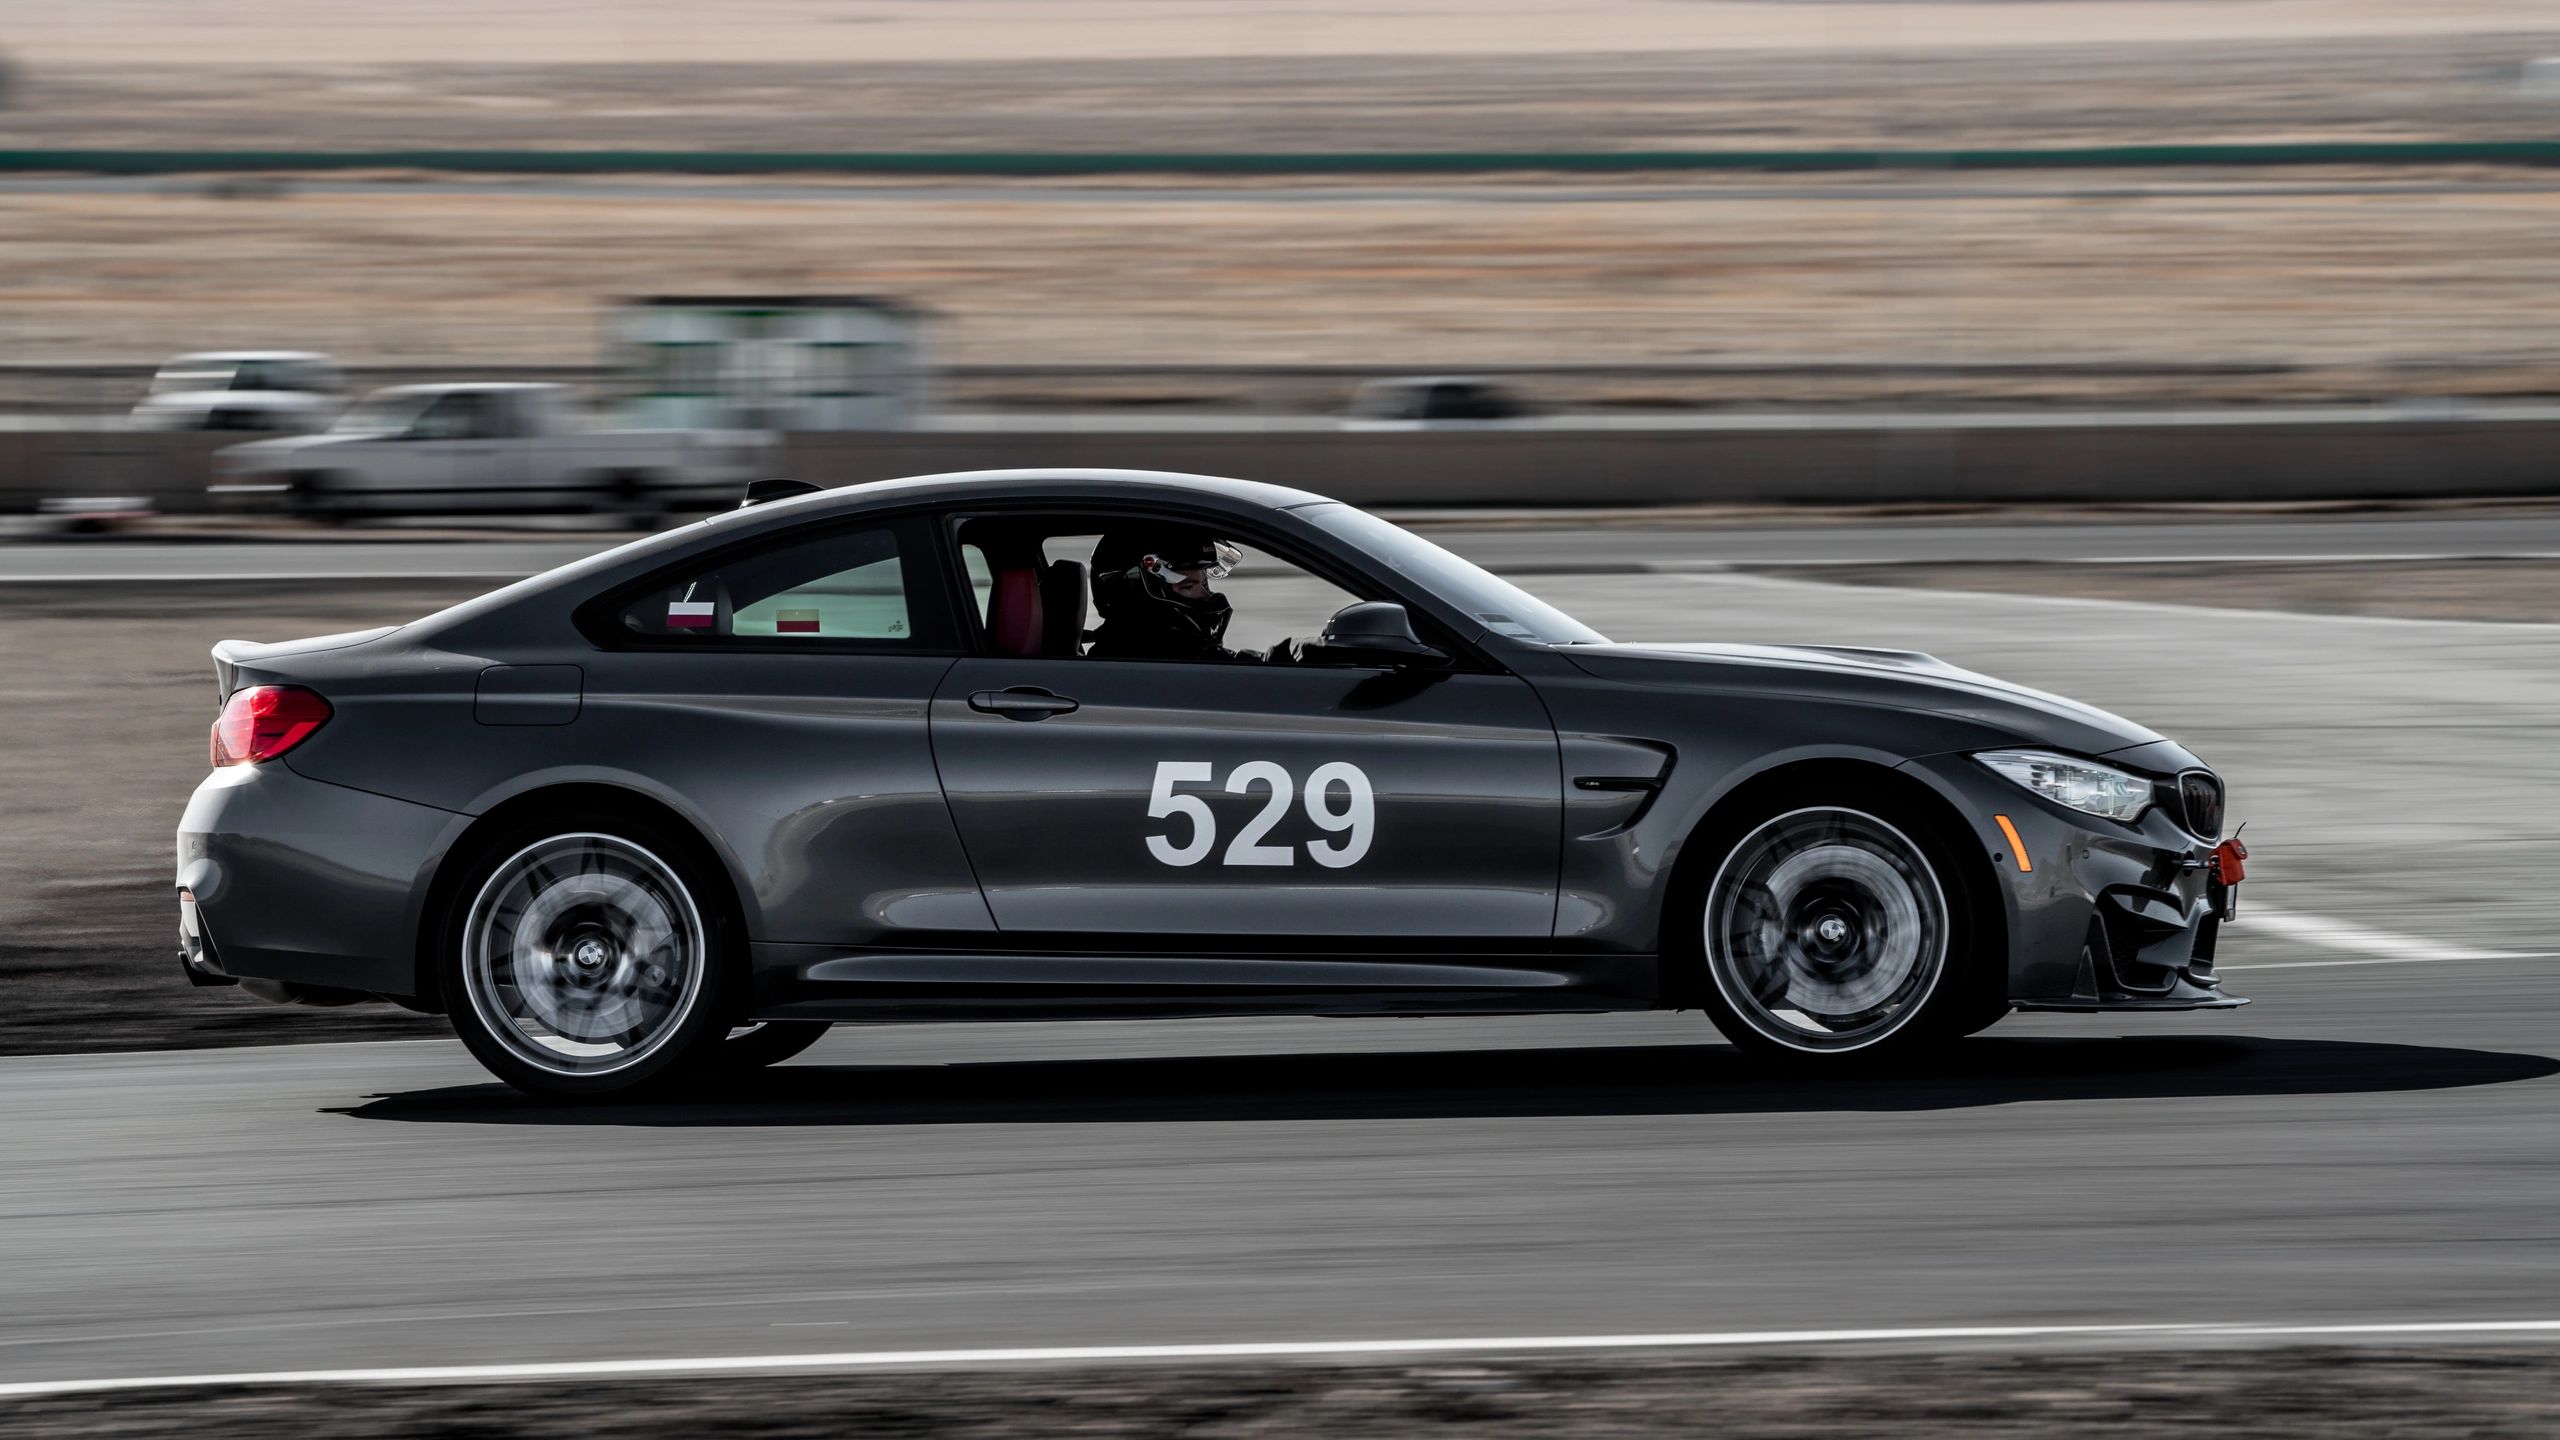 BMW car on the track driving at Willow Springs International Speedway